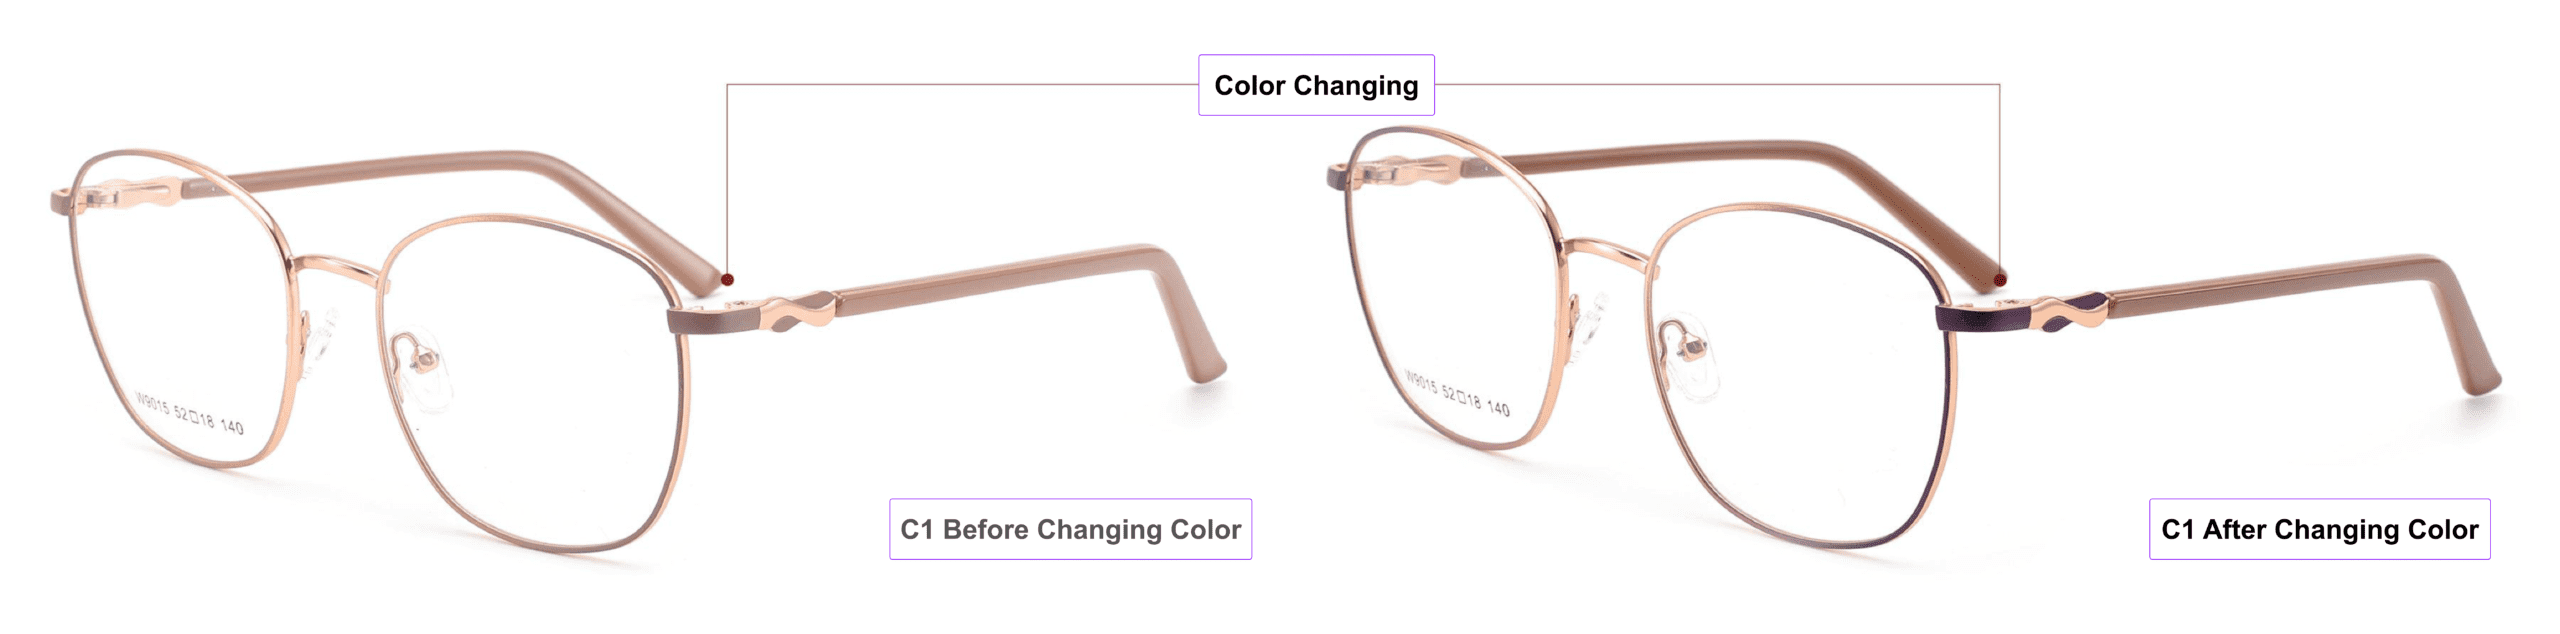 Sunlight Activated, Color Changing Glasses Frames, China Zhejiang Wenzhou eyeglass supplier, full frames, metal, brown,magenta purple,pink gold